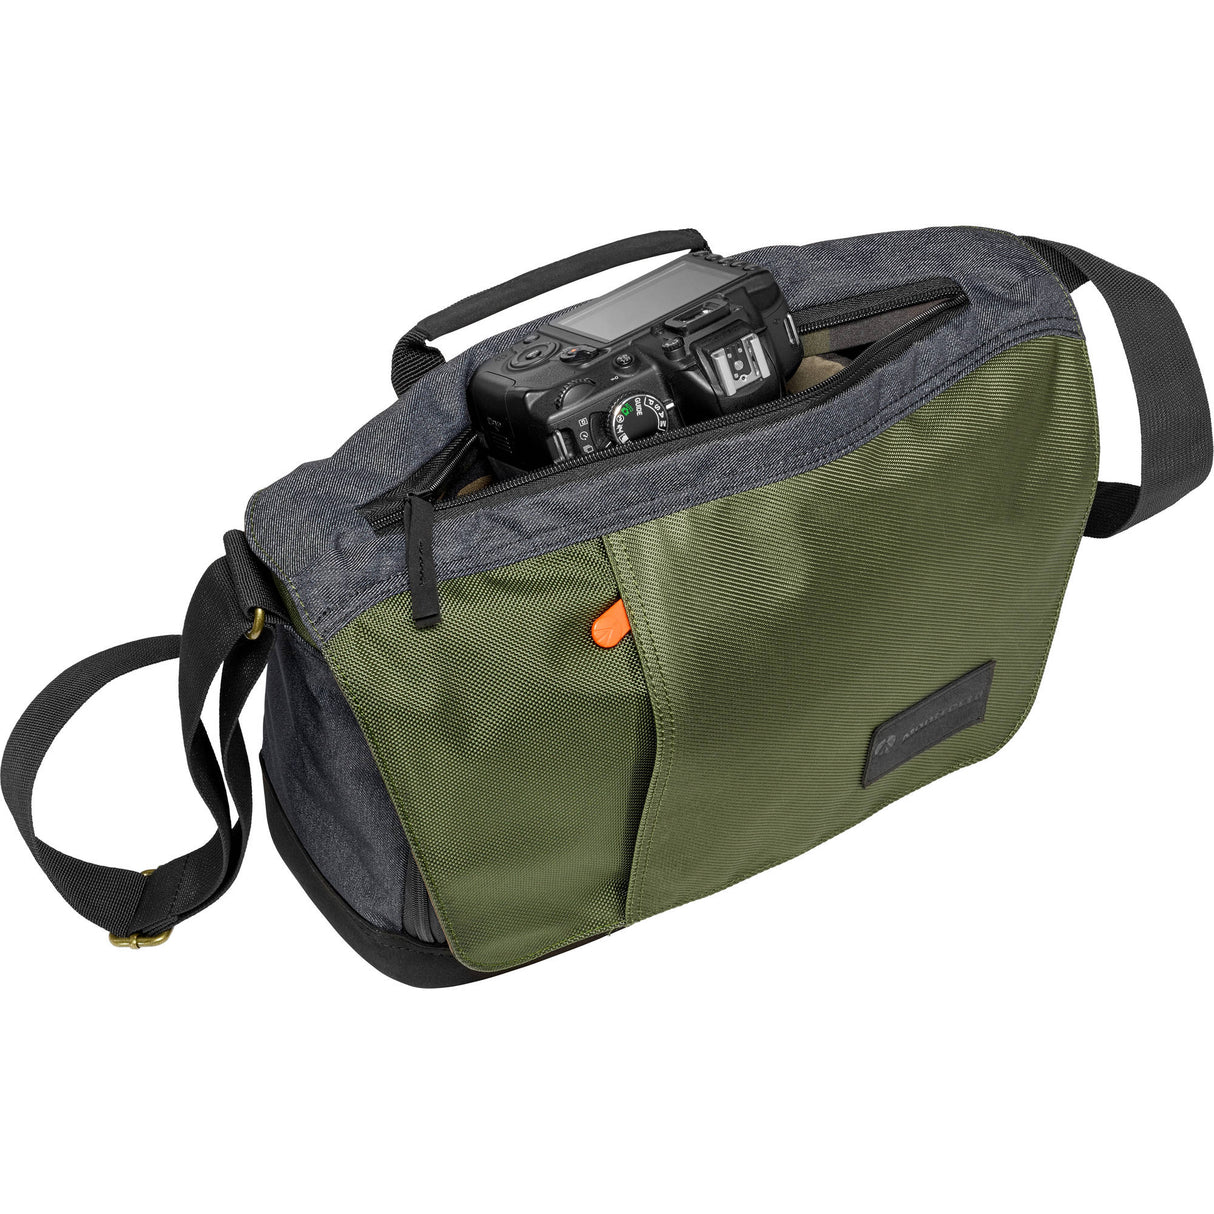 Manfrotto Street Camera Messenger bag for CSC/DSLR (Green and Gray)